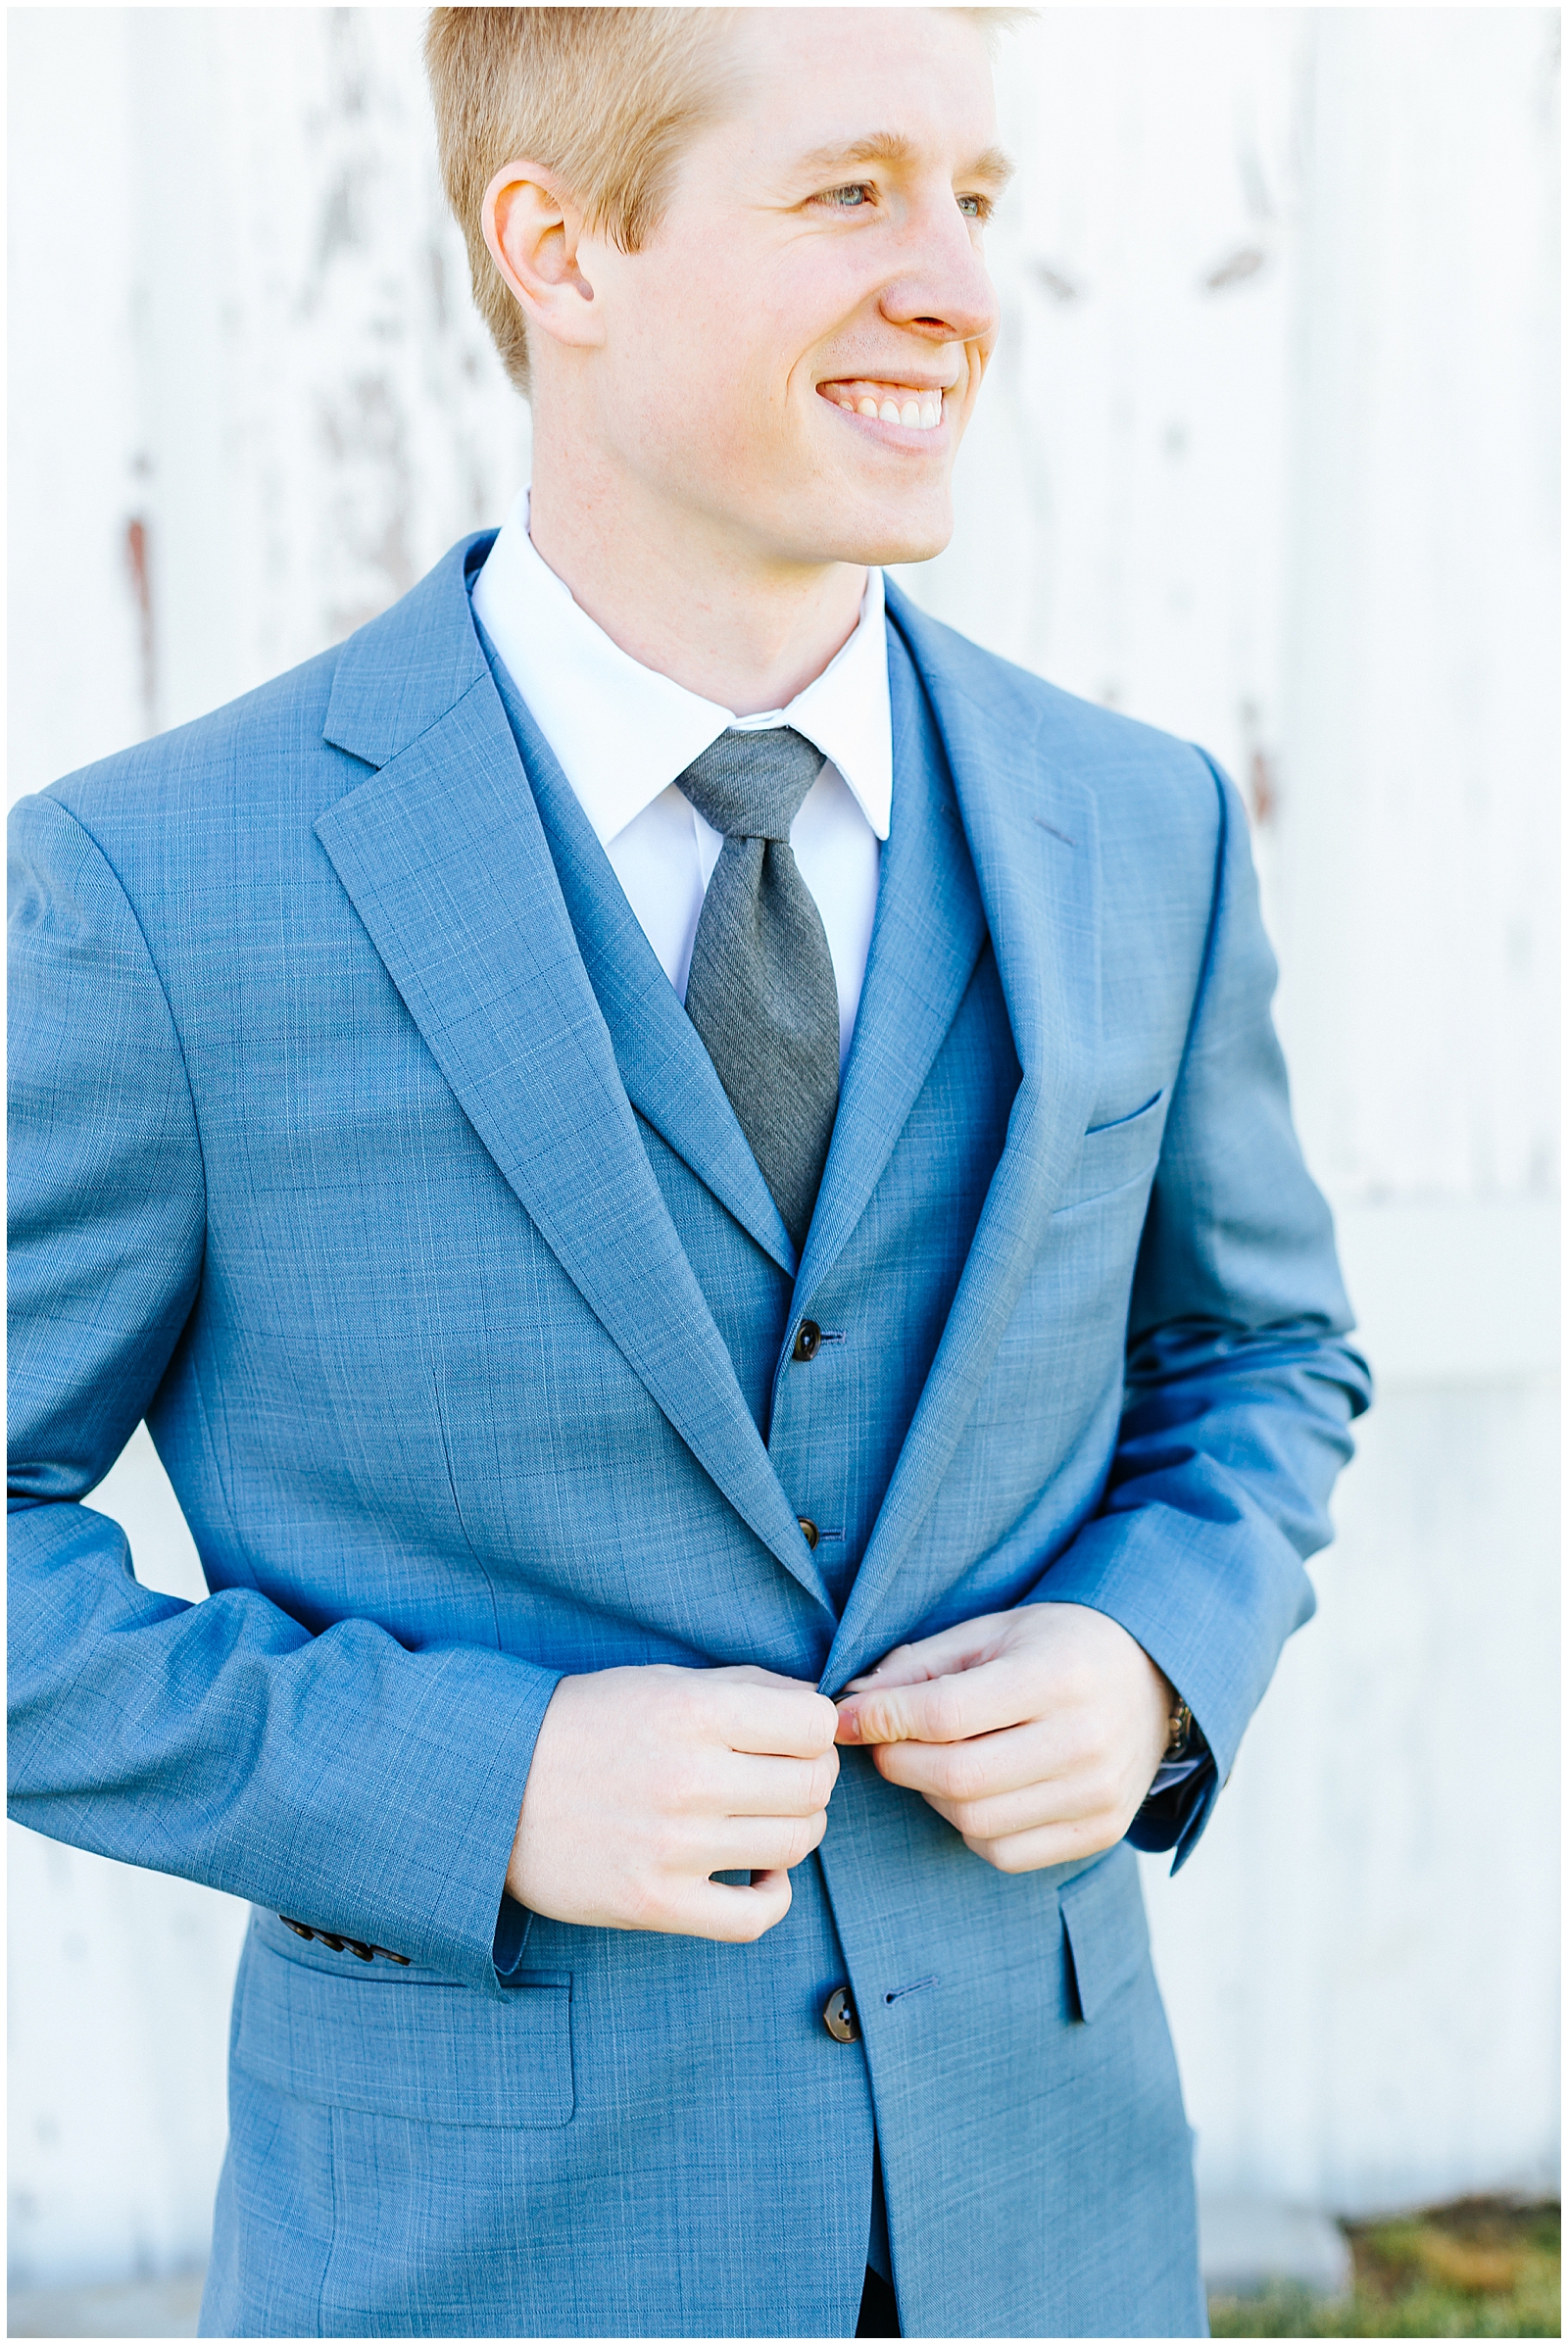 5 Style Tips for Grooms